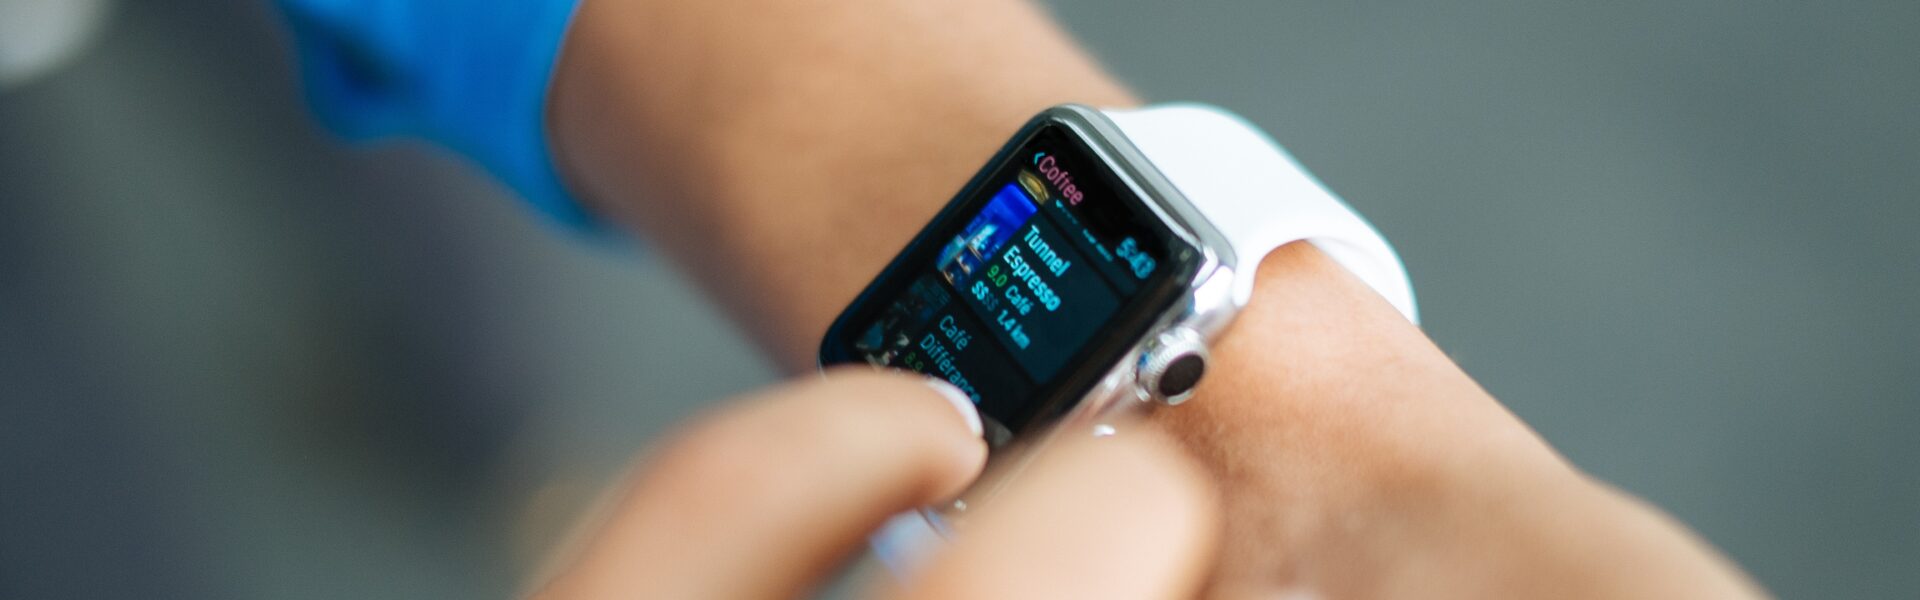 person wearing silver Apple Watch with white Sport Band